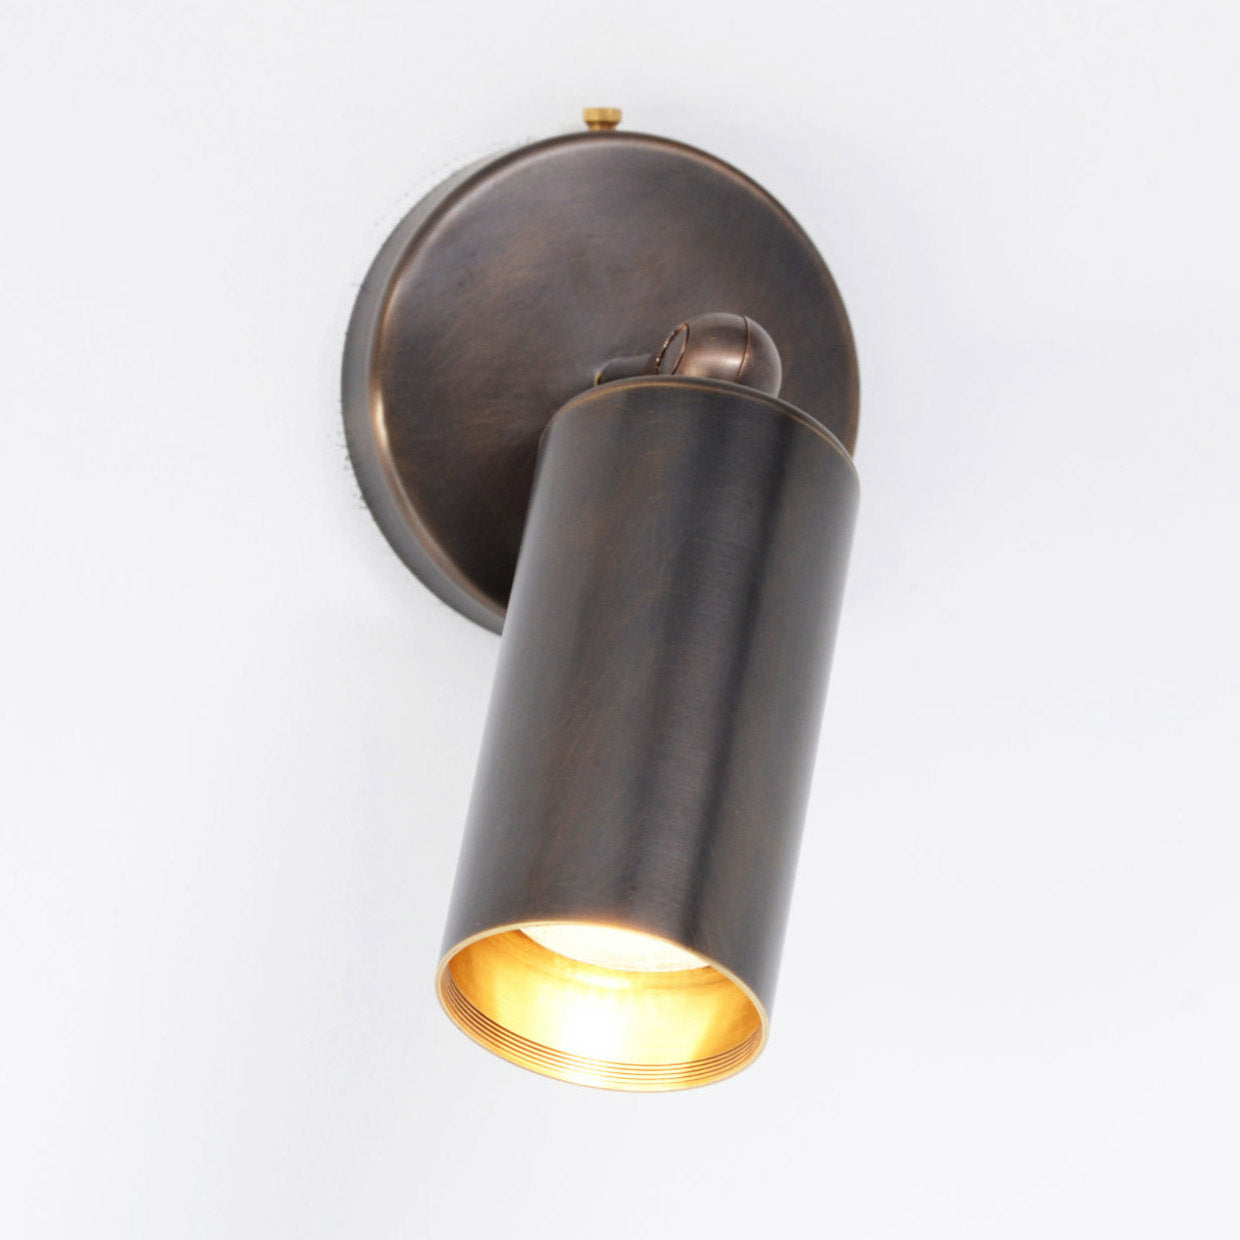 The VIDERE luxury wall Light is handmade in the UK and supplied by South Charlotte Fine Lighting in Edinburgh, Scotland.